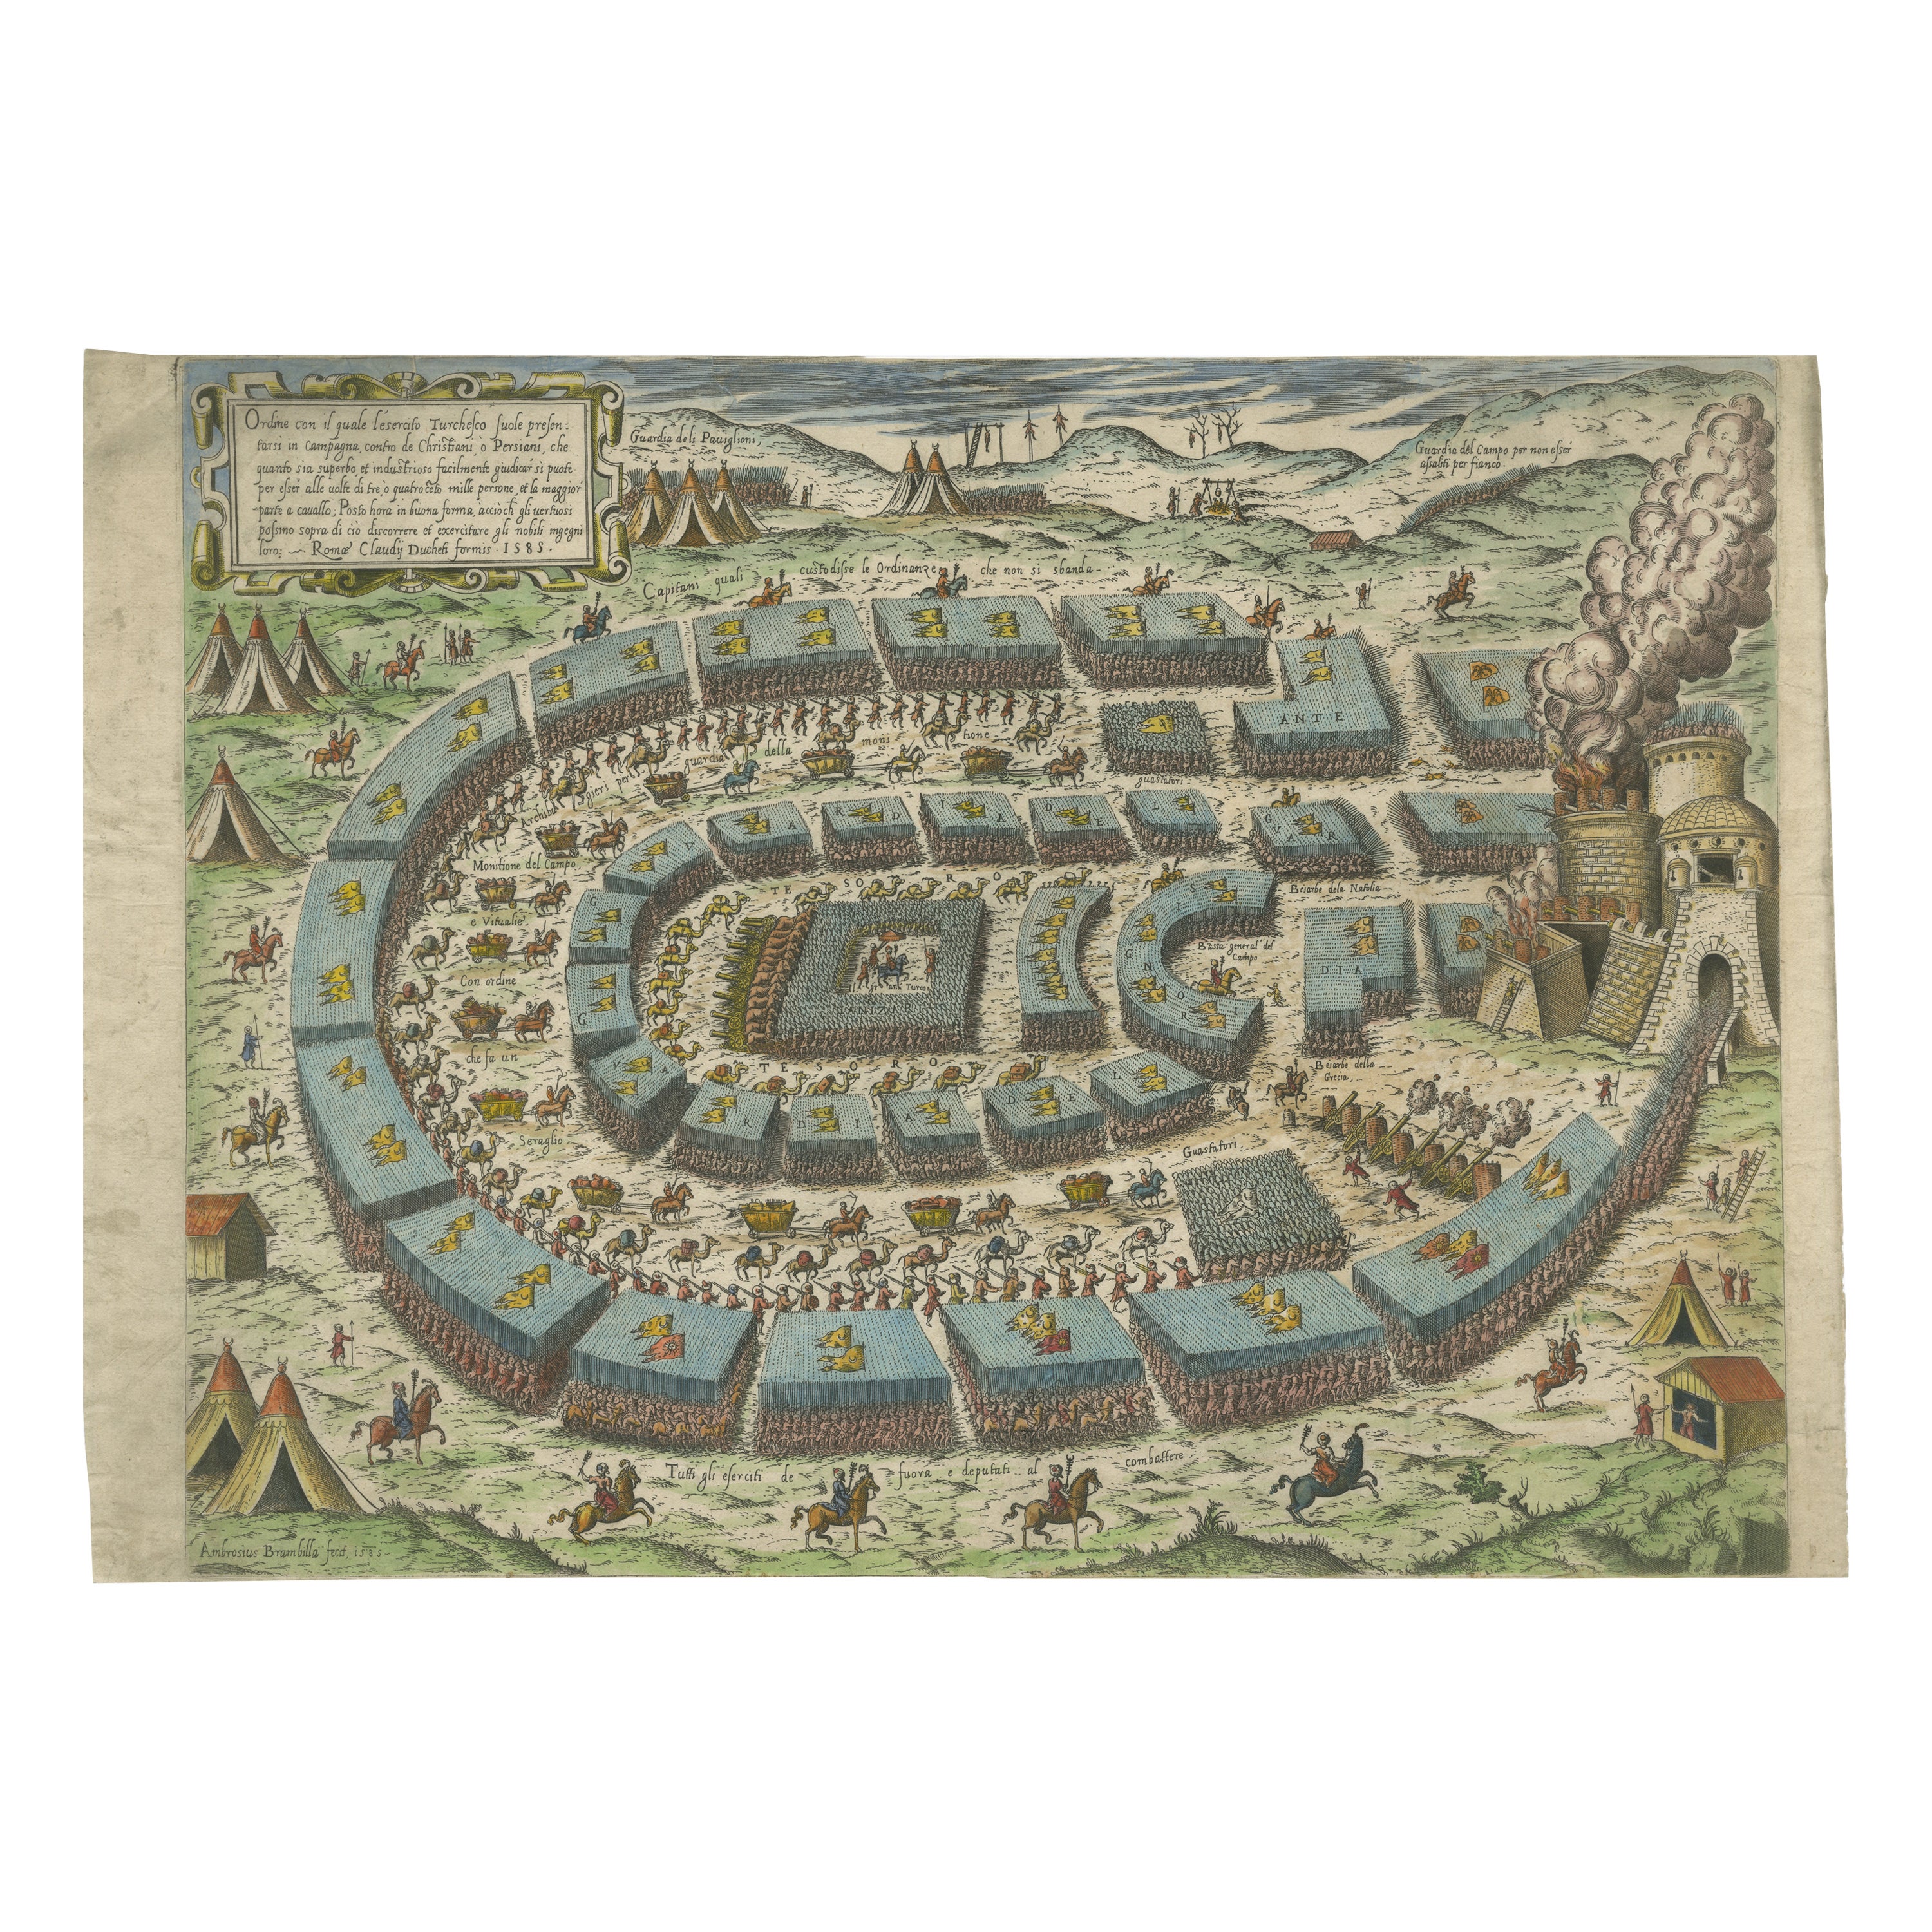 Siege of Szigetvár, 1566: Lafreri's Rare Handcolored Engraving Published in 1585 For Sale